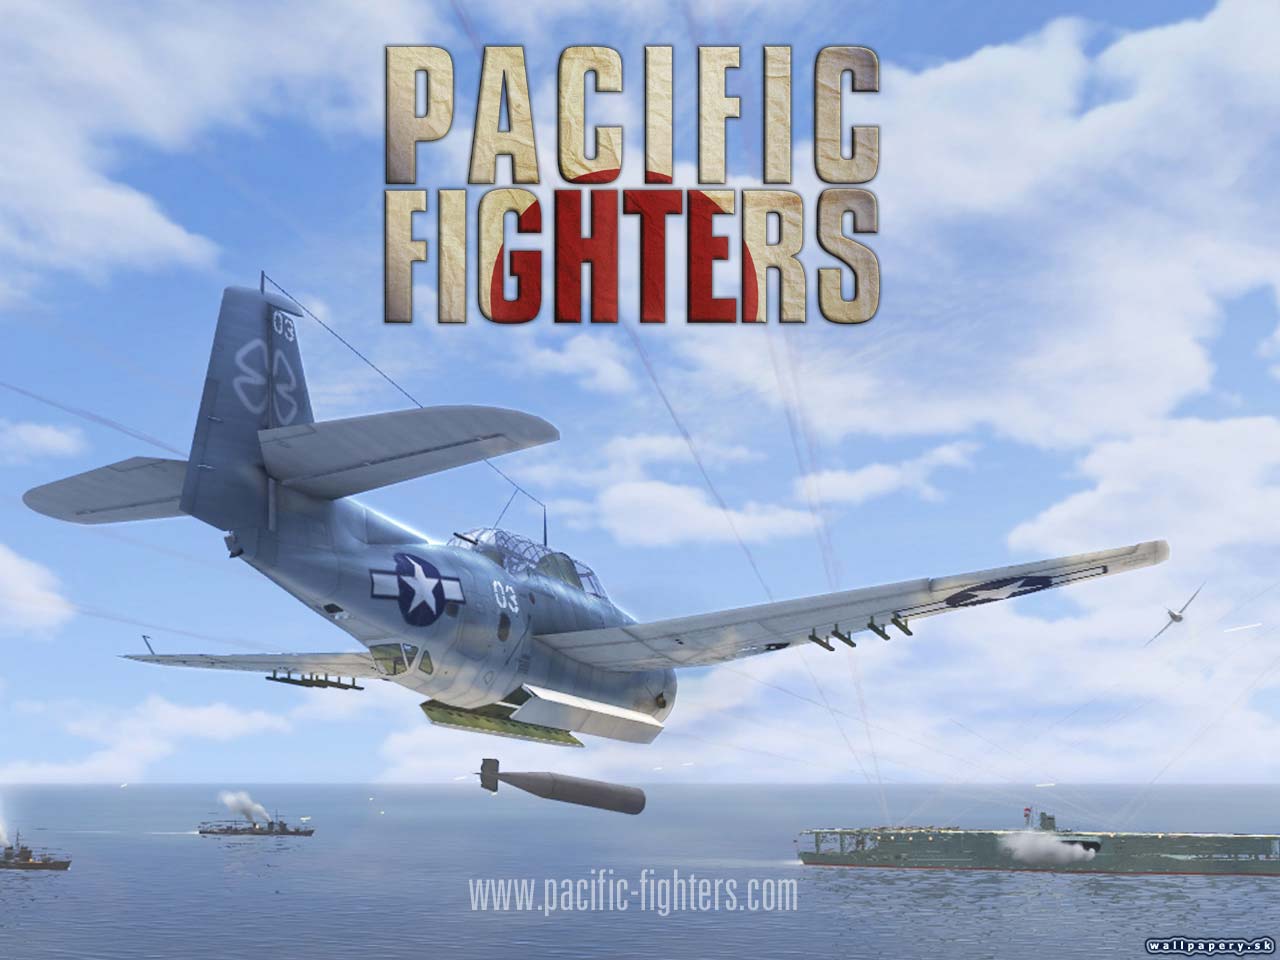 Pacific Fighters - wallpaper 3